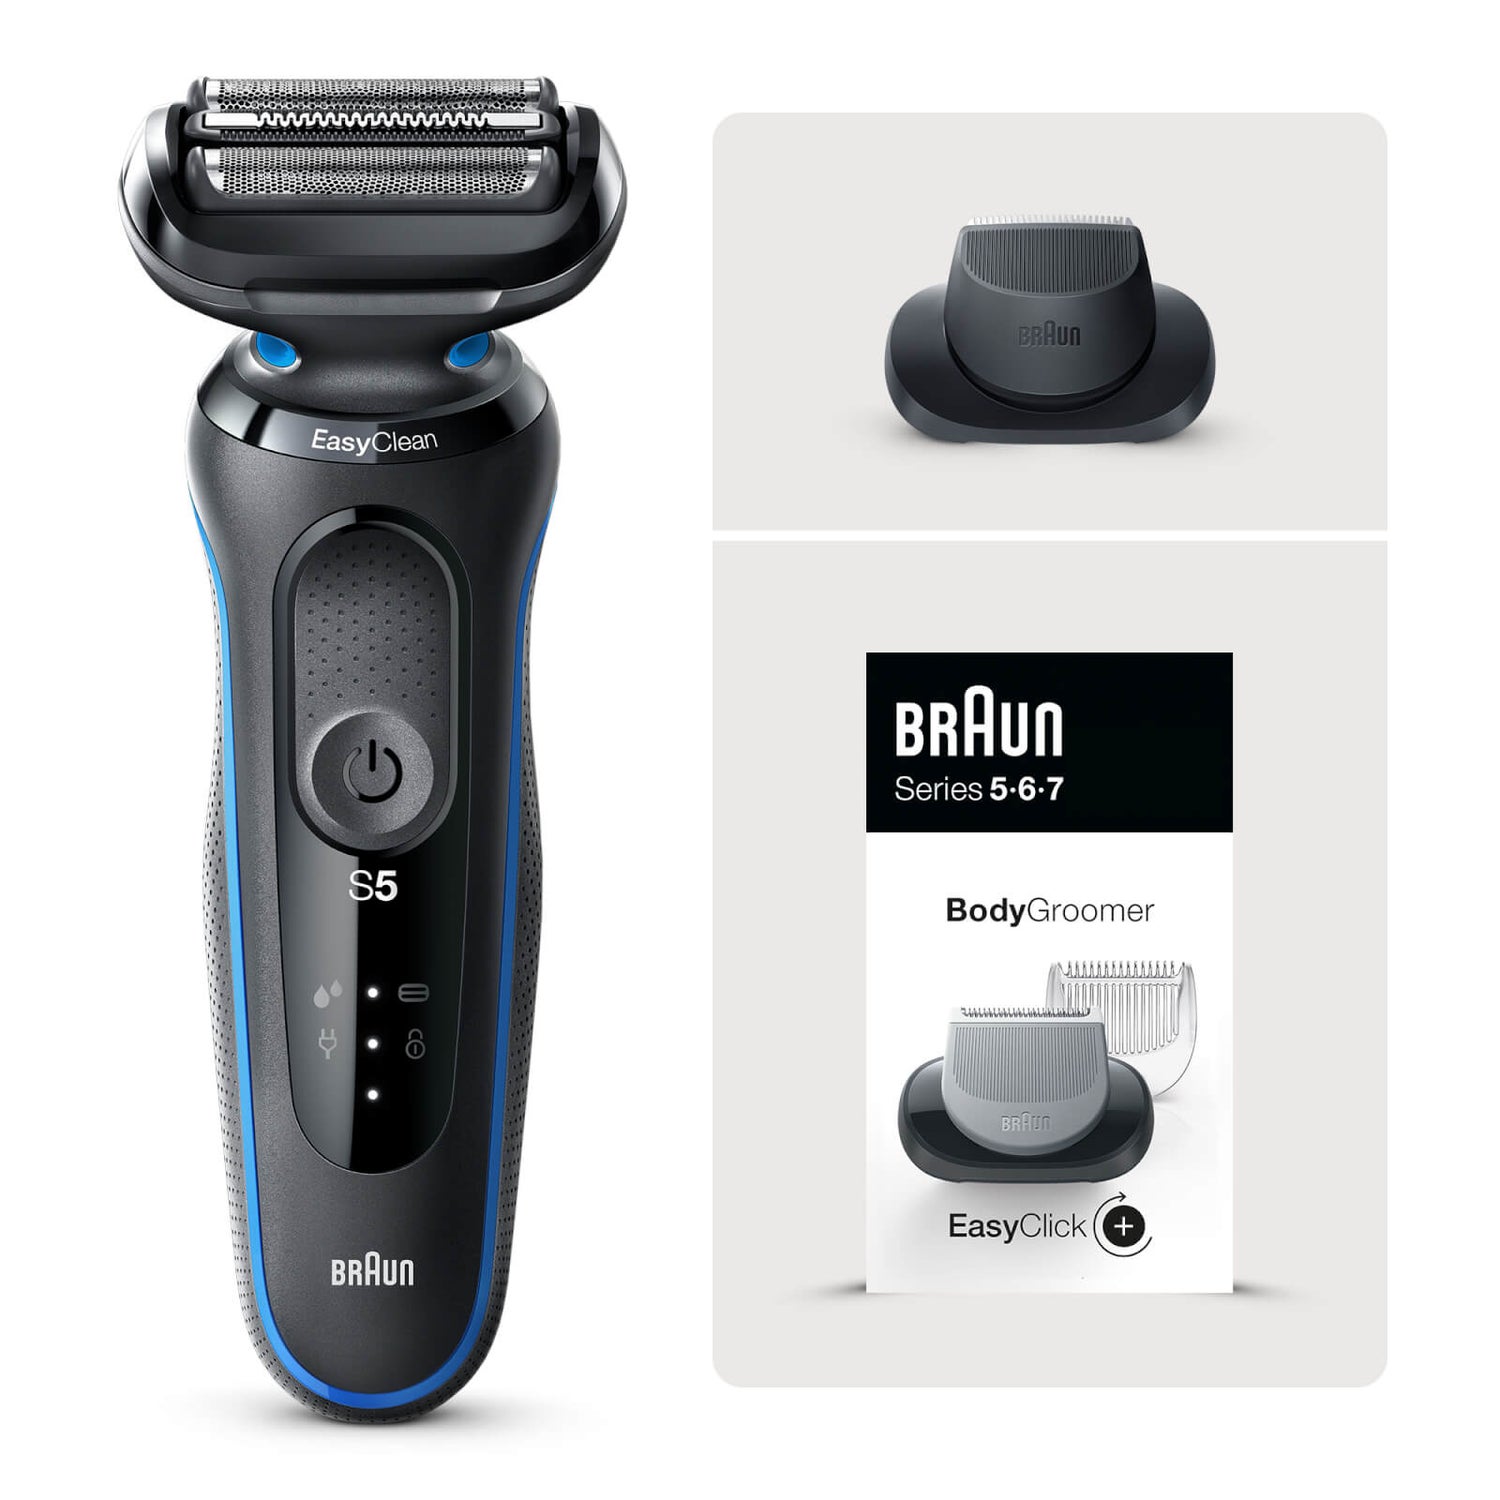 Braun Series 5 Electric Shaver with Precision Trimmer and Body Groomer Bundle